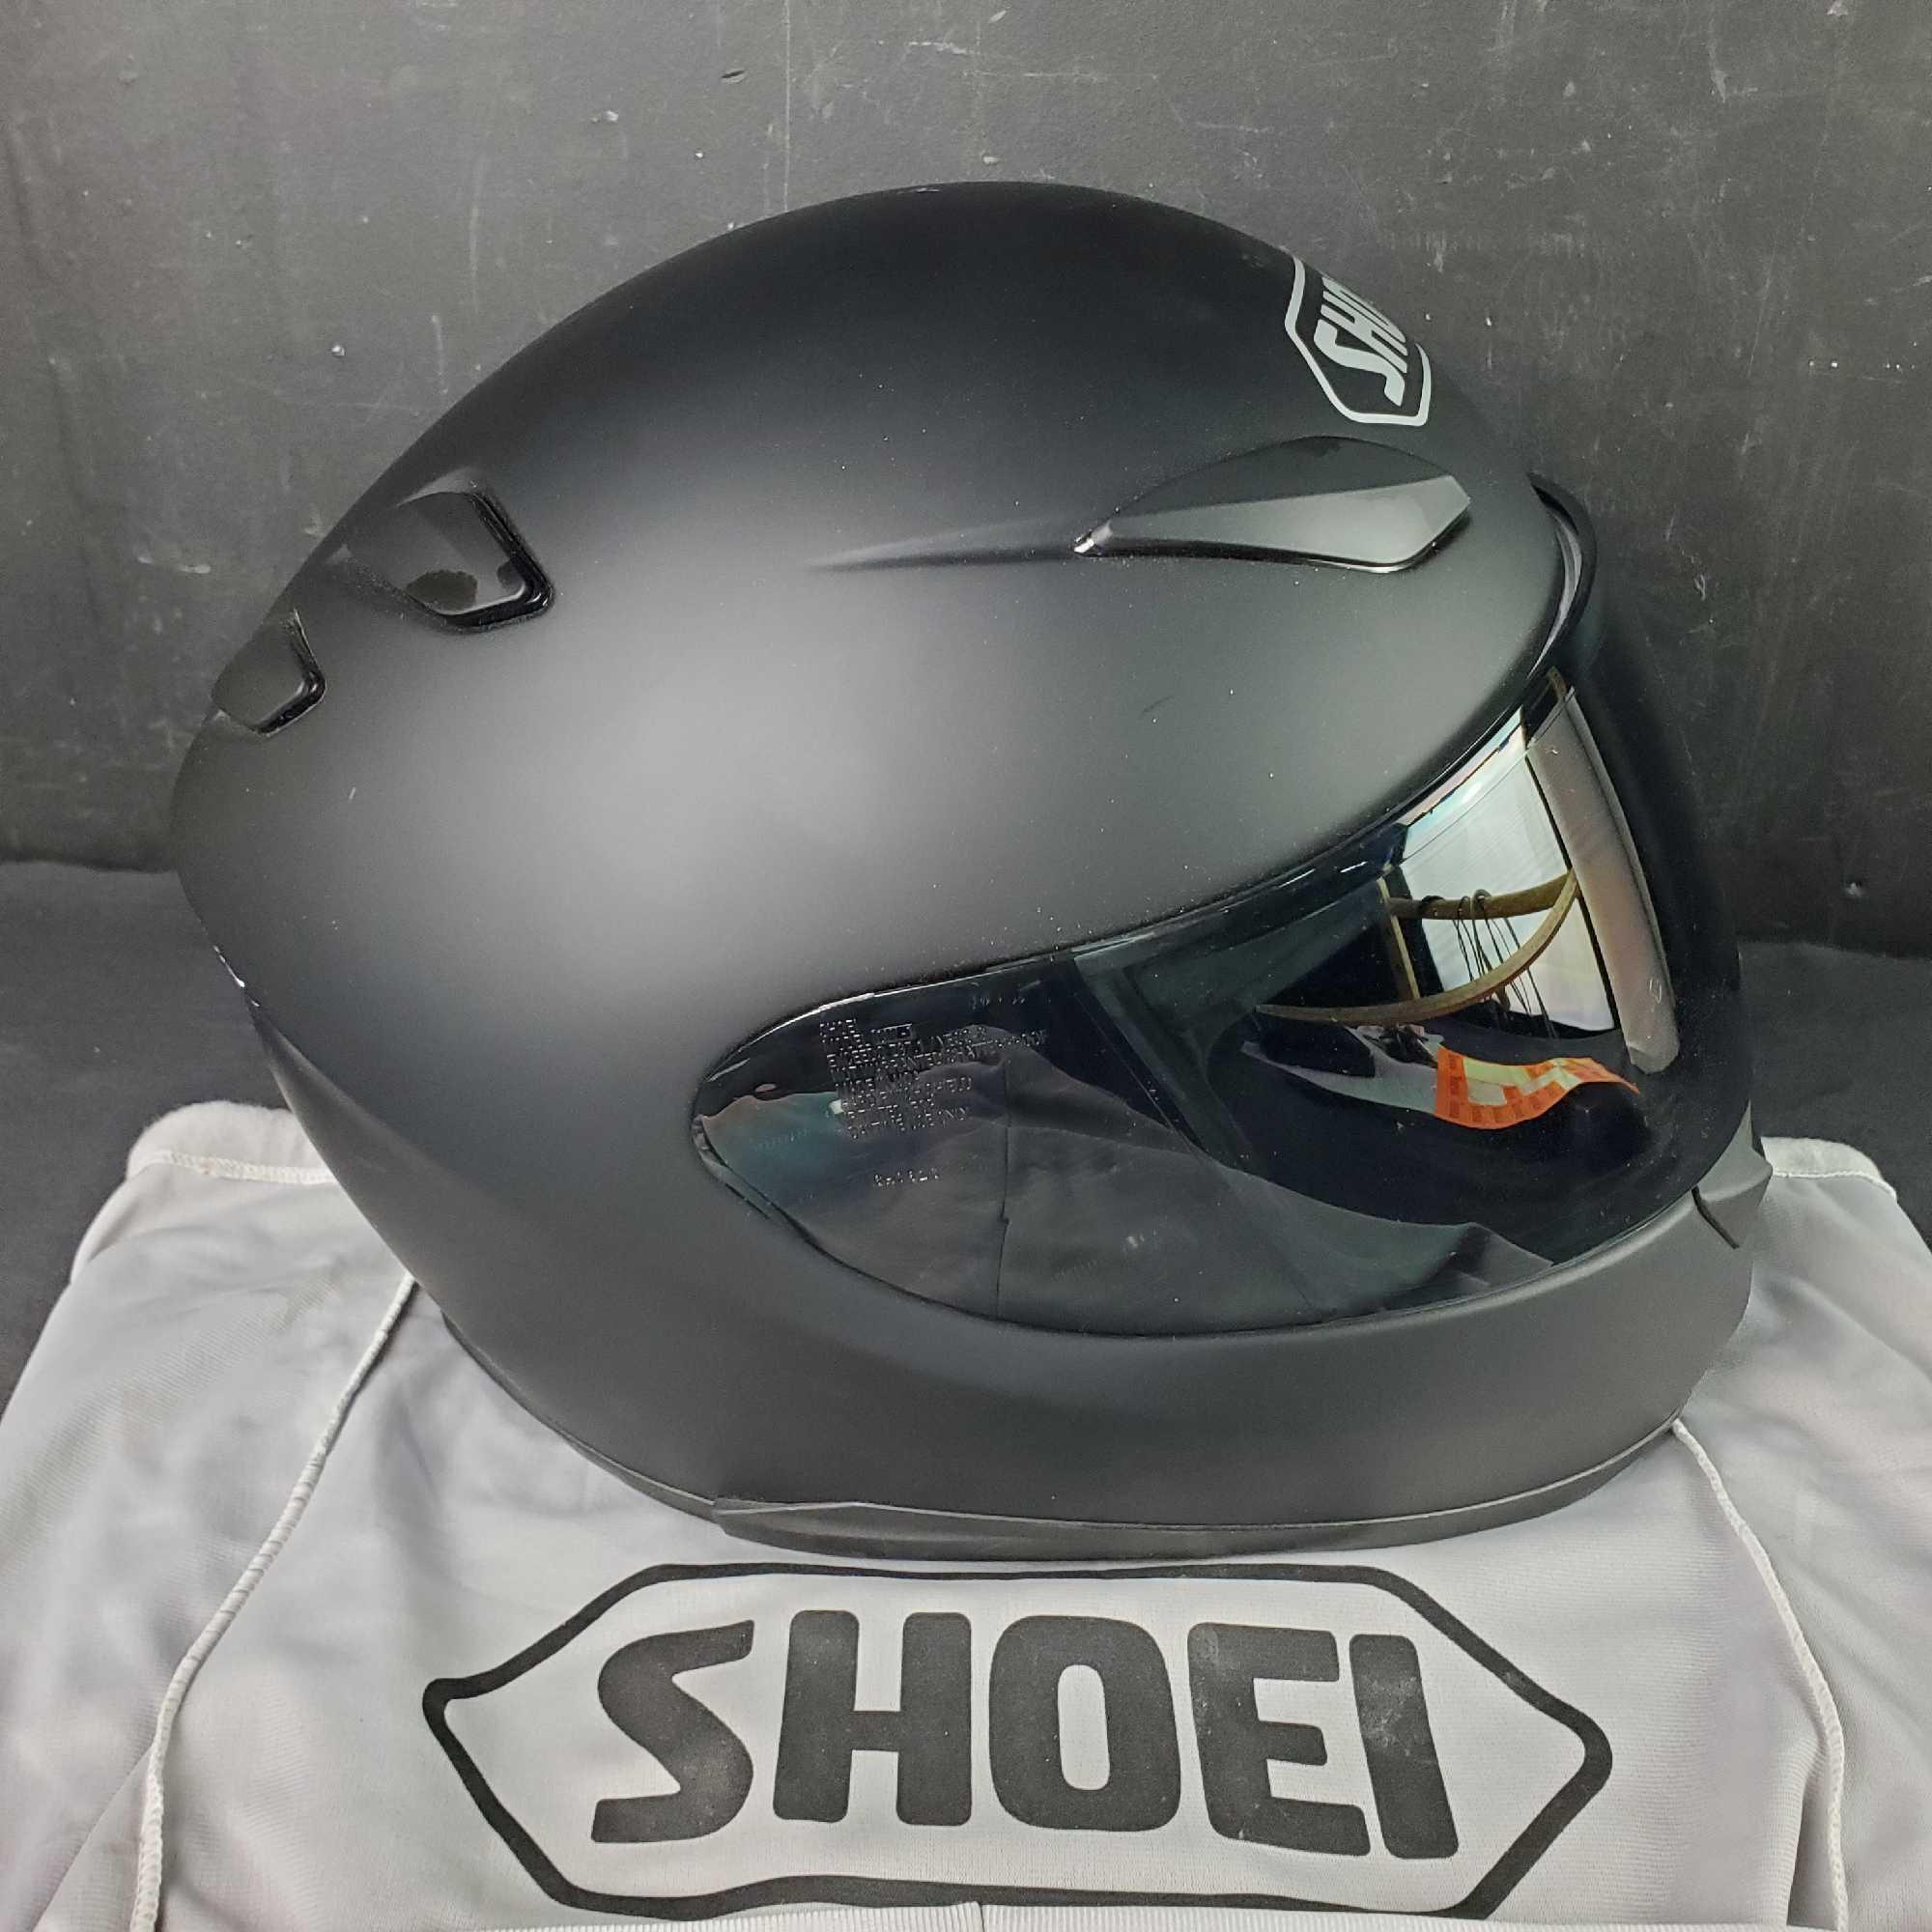 Shoei RF-1100 Matte black Full Face Motorcycle Street Riding Helmet size Large with bag